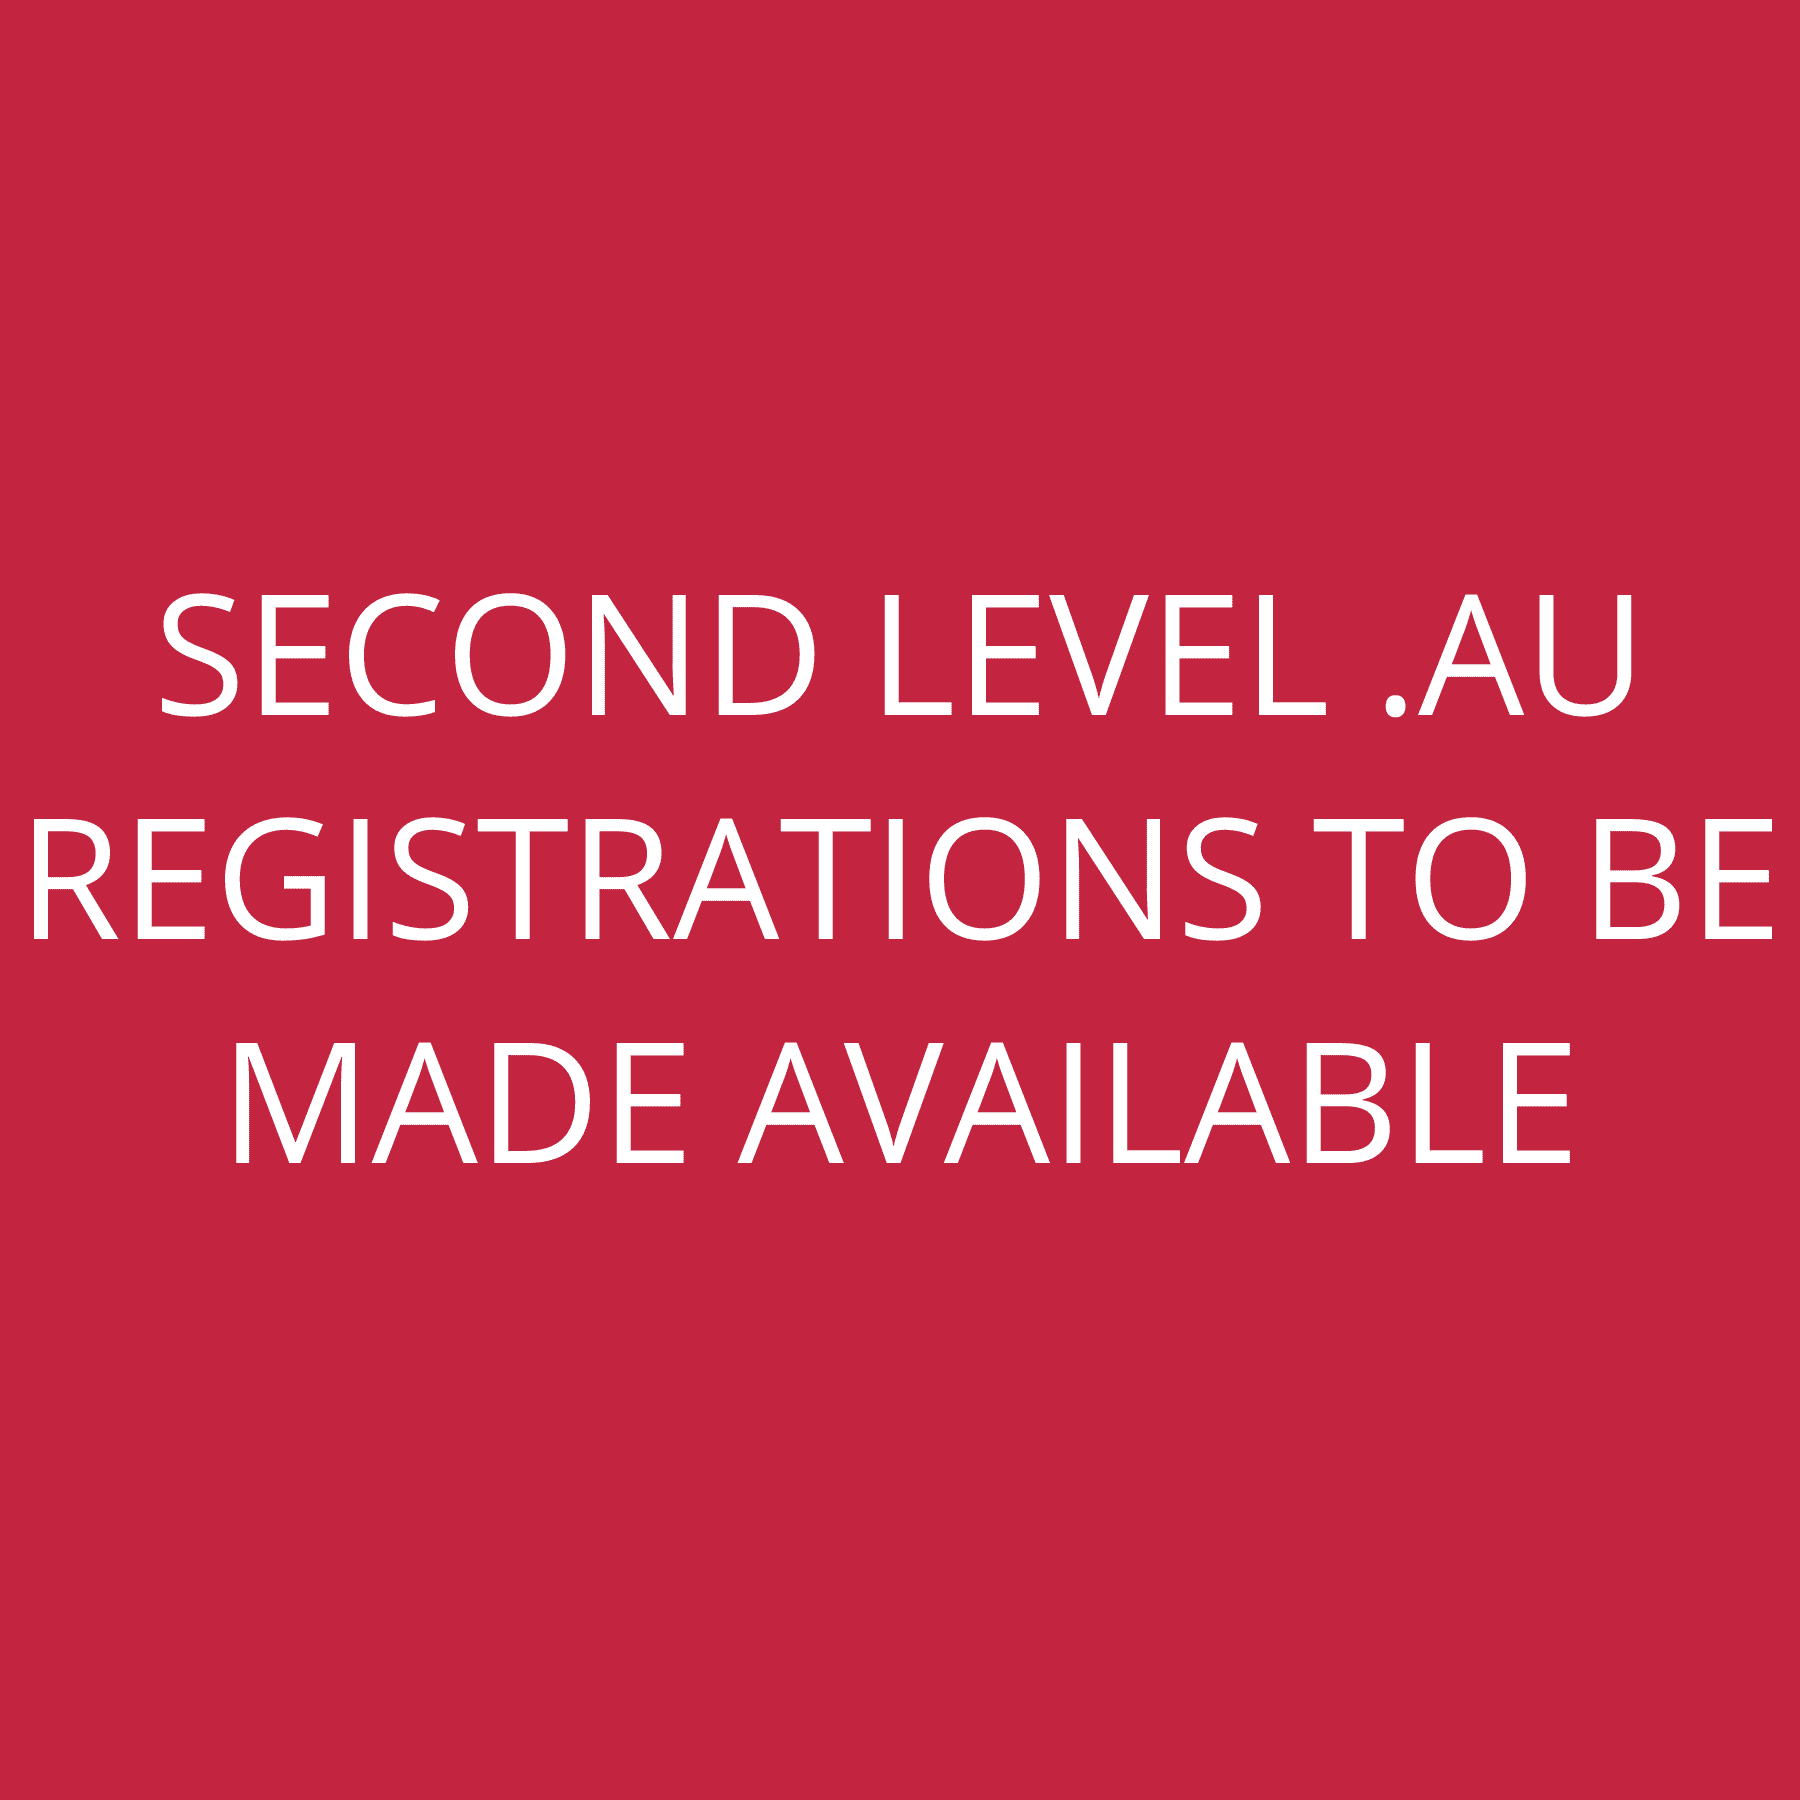 Second level .au registrations to be made available